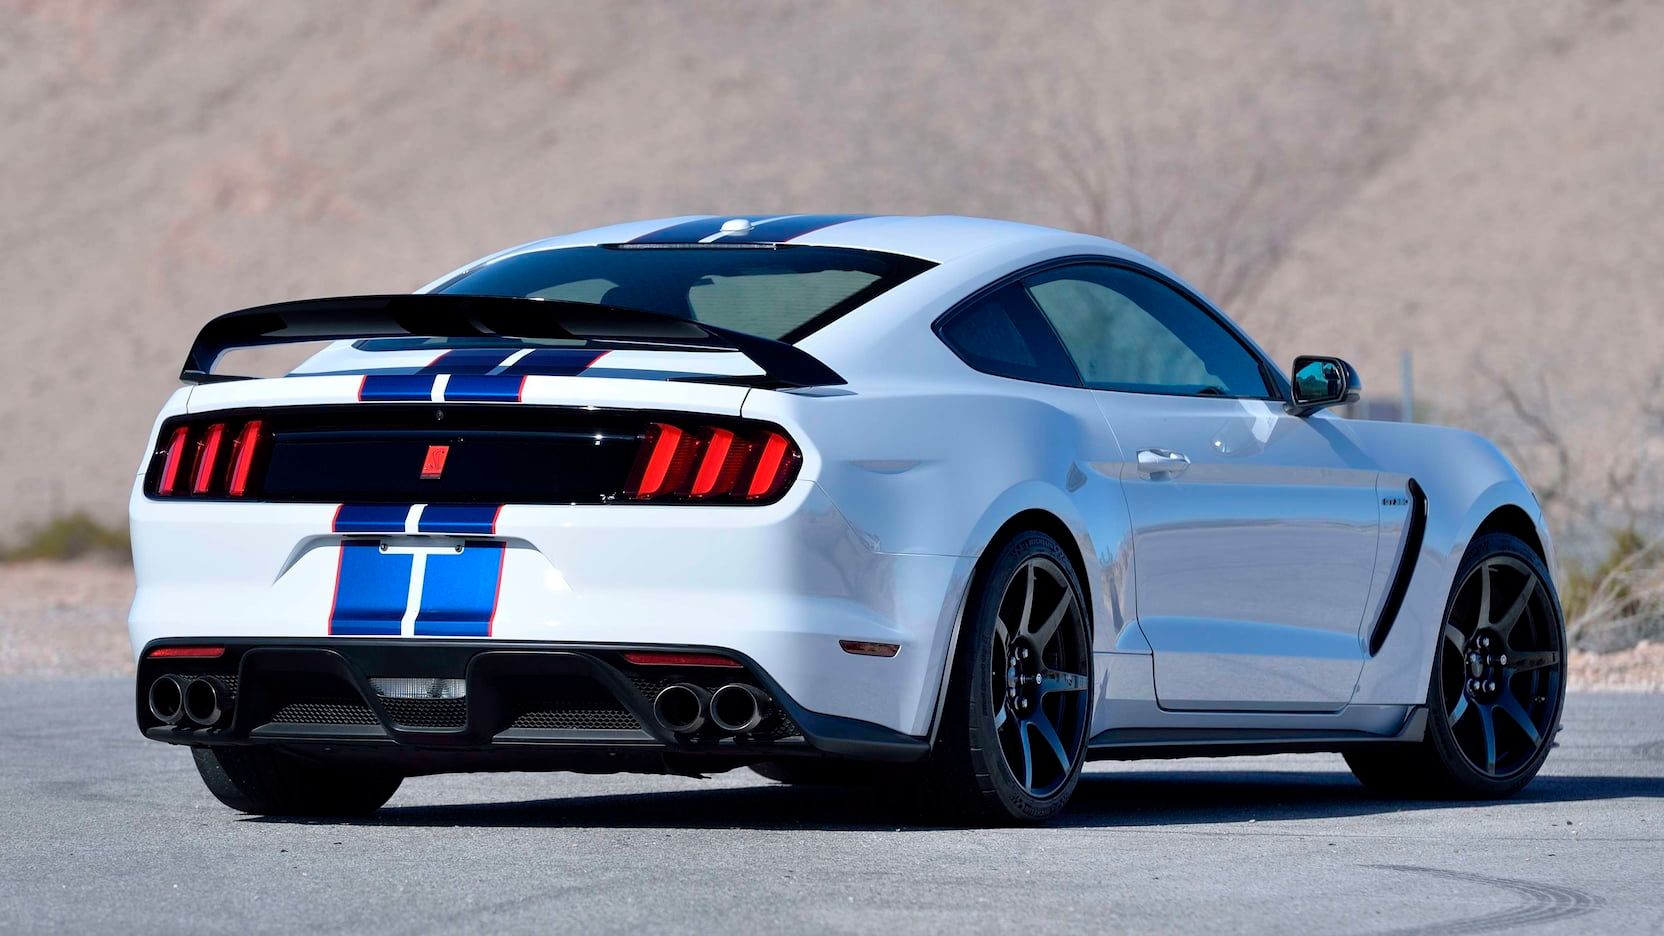 White 2015 Ford Mustang Shelby GT350R parked